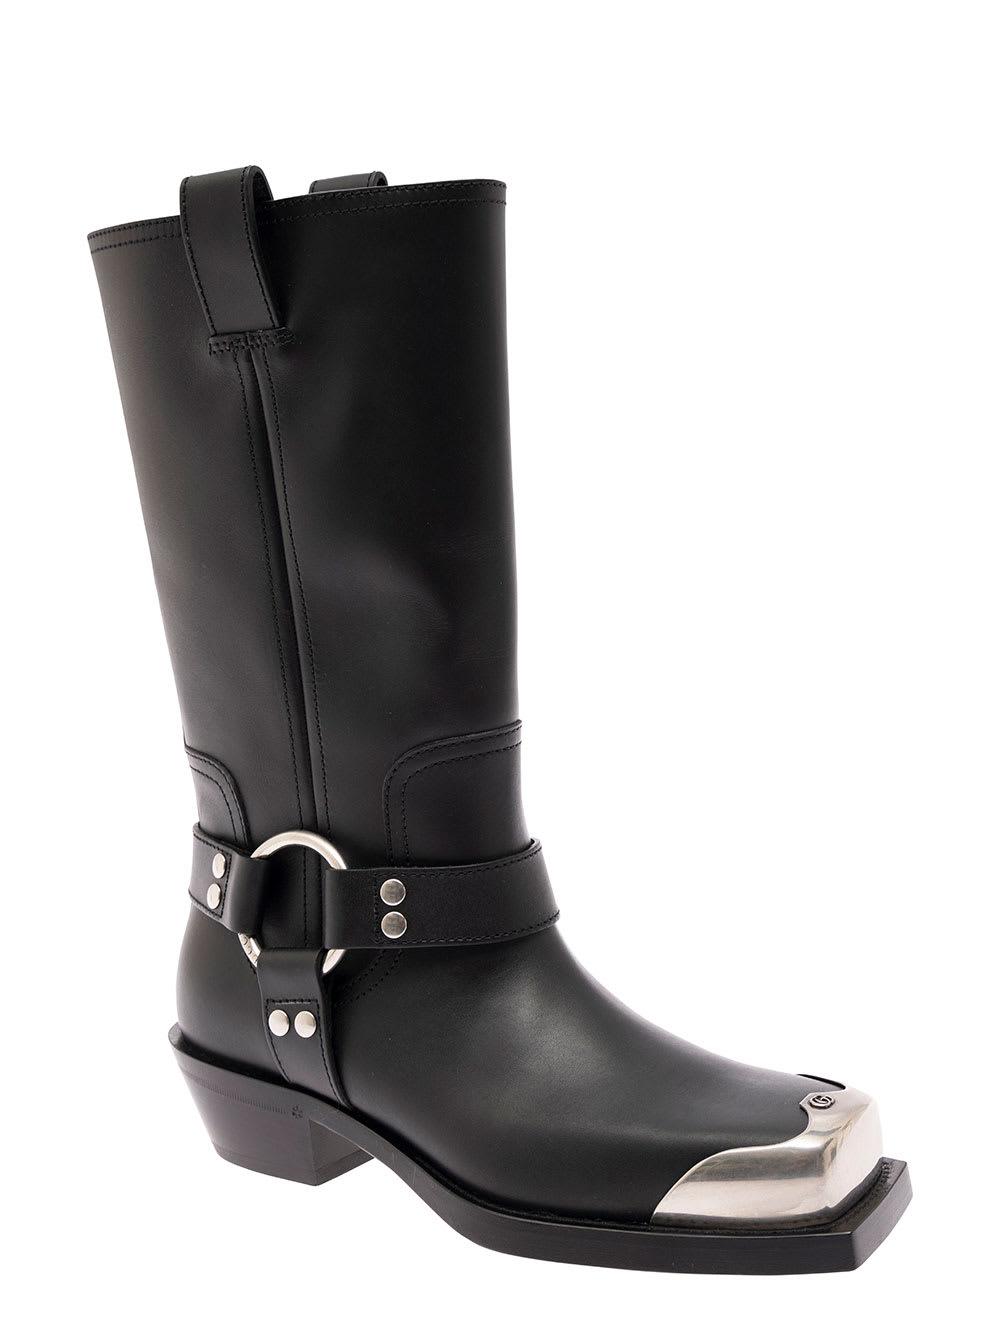 Gucci Black Boots With Metal Square Toe And Harness Detail In 